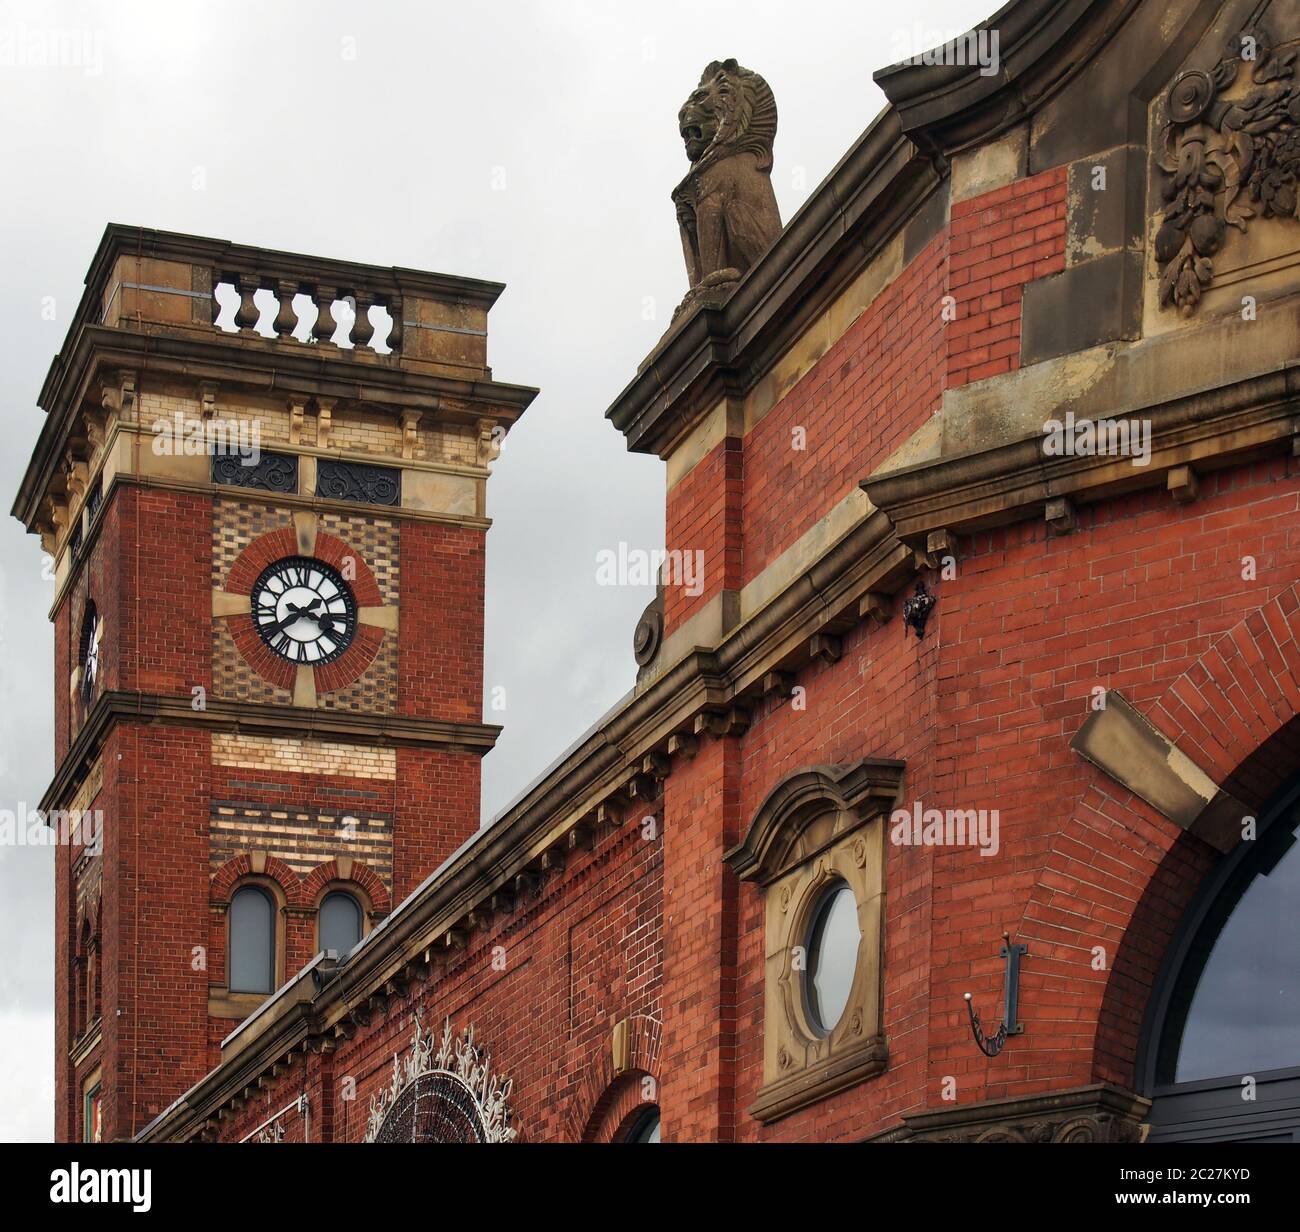 a close up view of the entrance and clock tower to the market hall in ashton under lyne built in 1829 Stock Photo